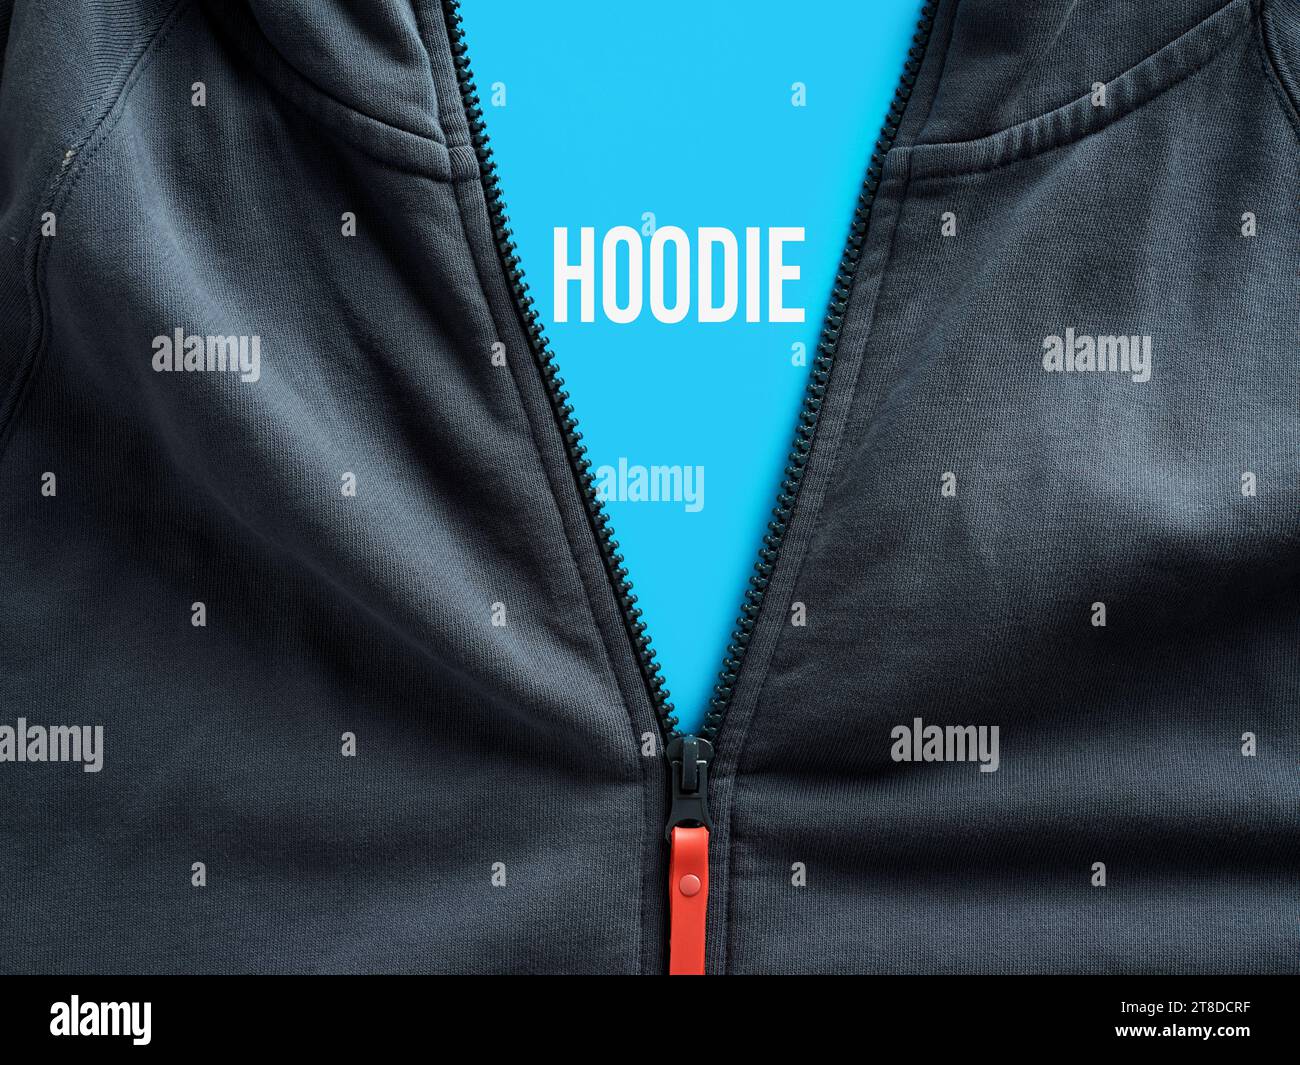 Opened zipper of a hoodie showing the word hoodie on a blue tag. Casual sportswear clothing concept. Stock Photo